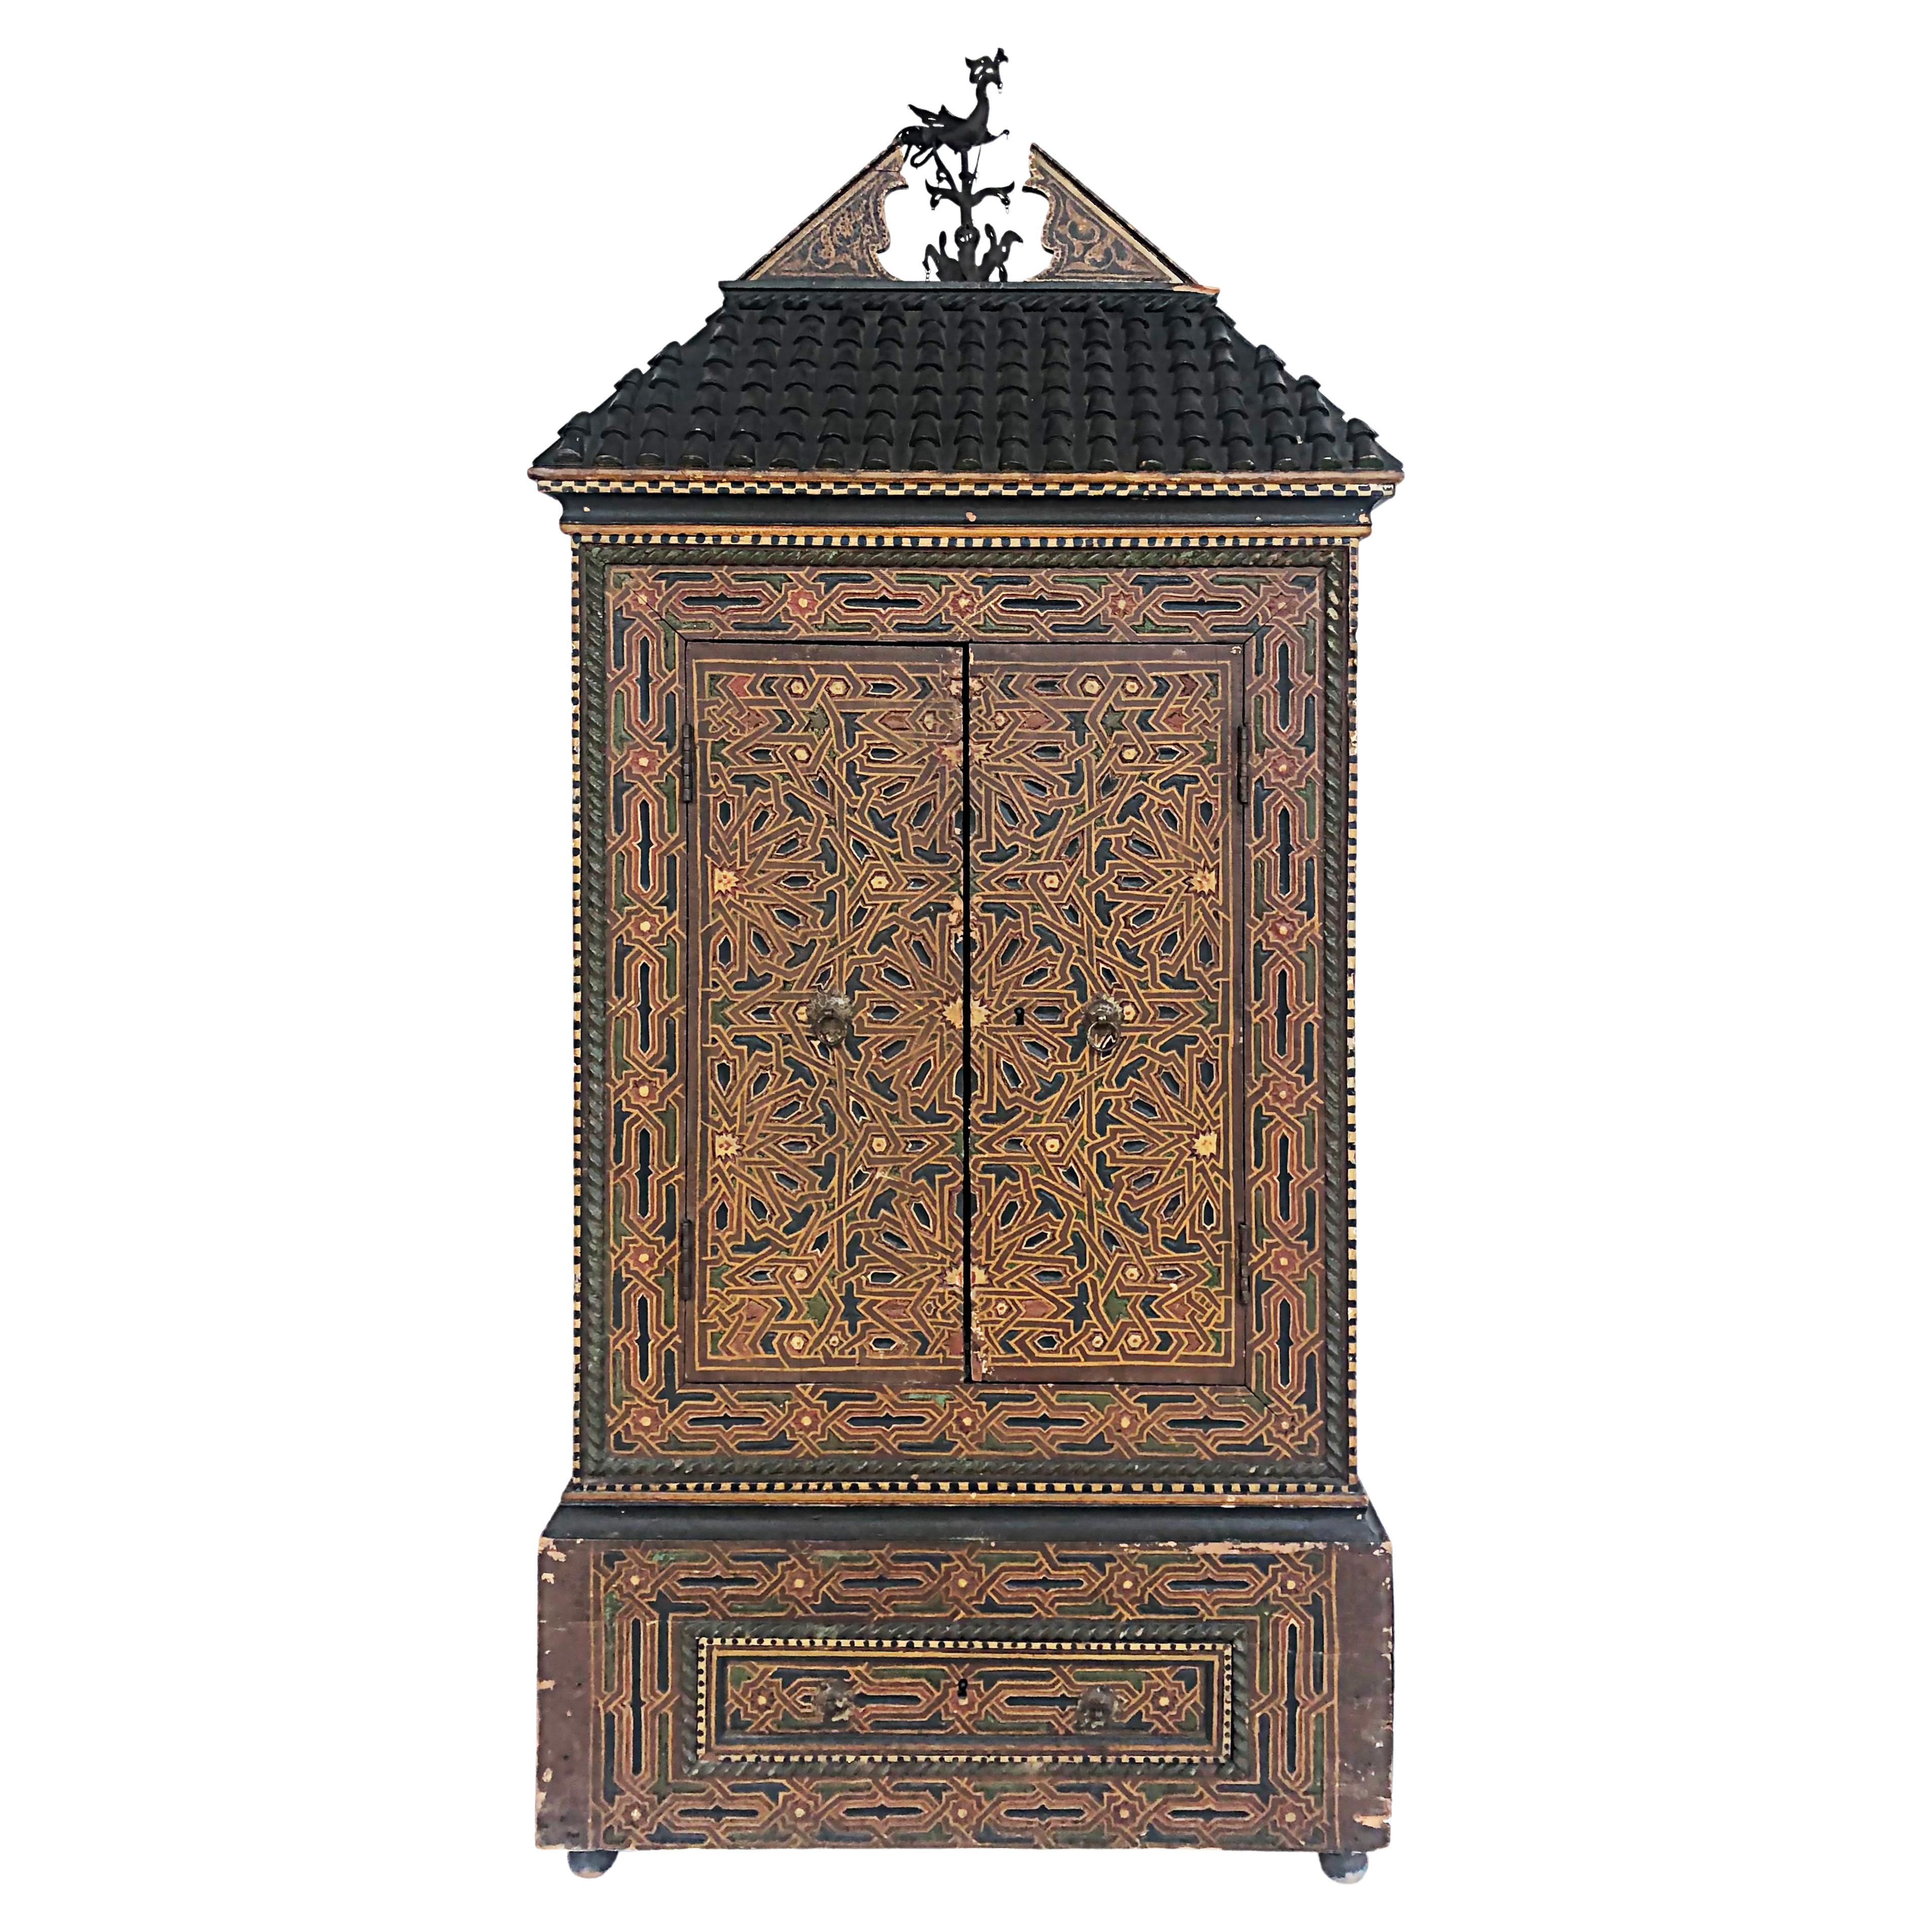 Eclectic Antique Asian Polychrome Wood Cabinet, Embellished Roof